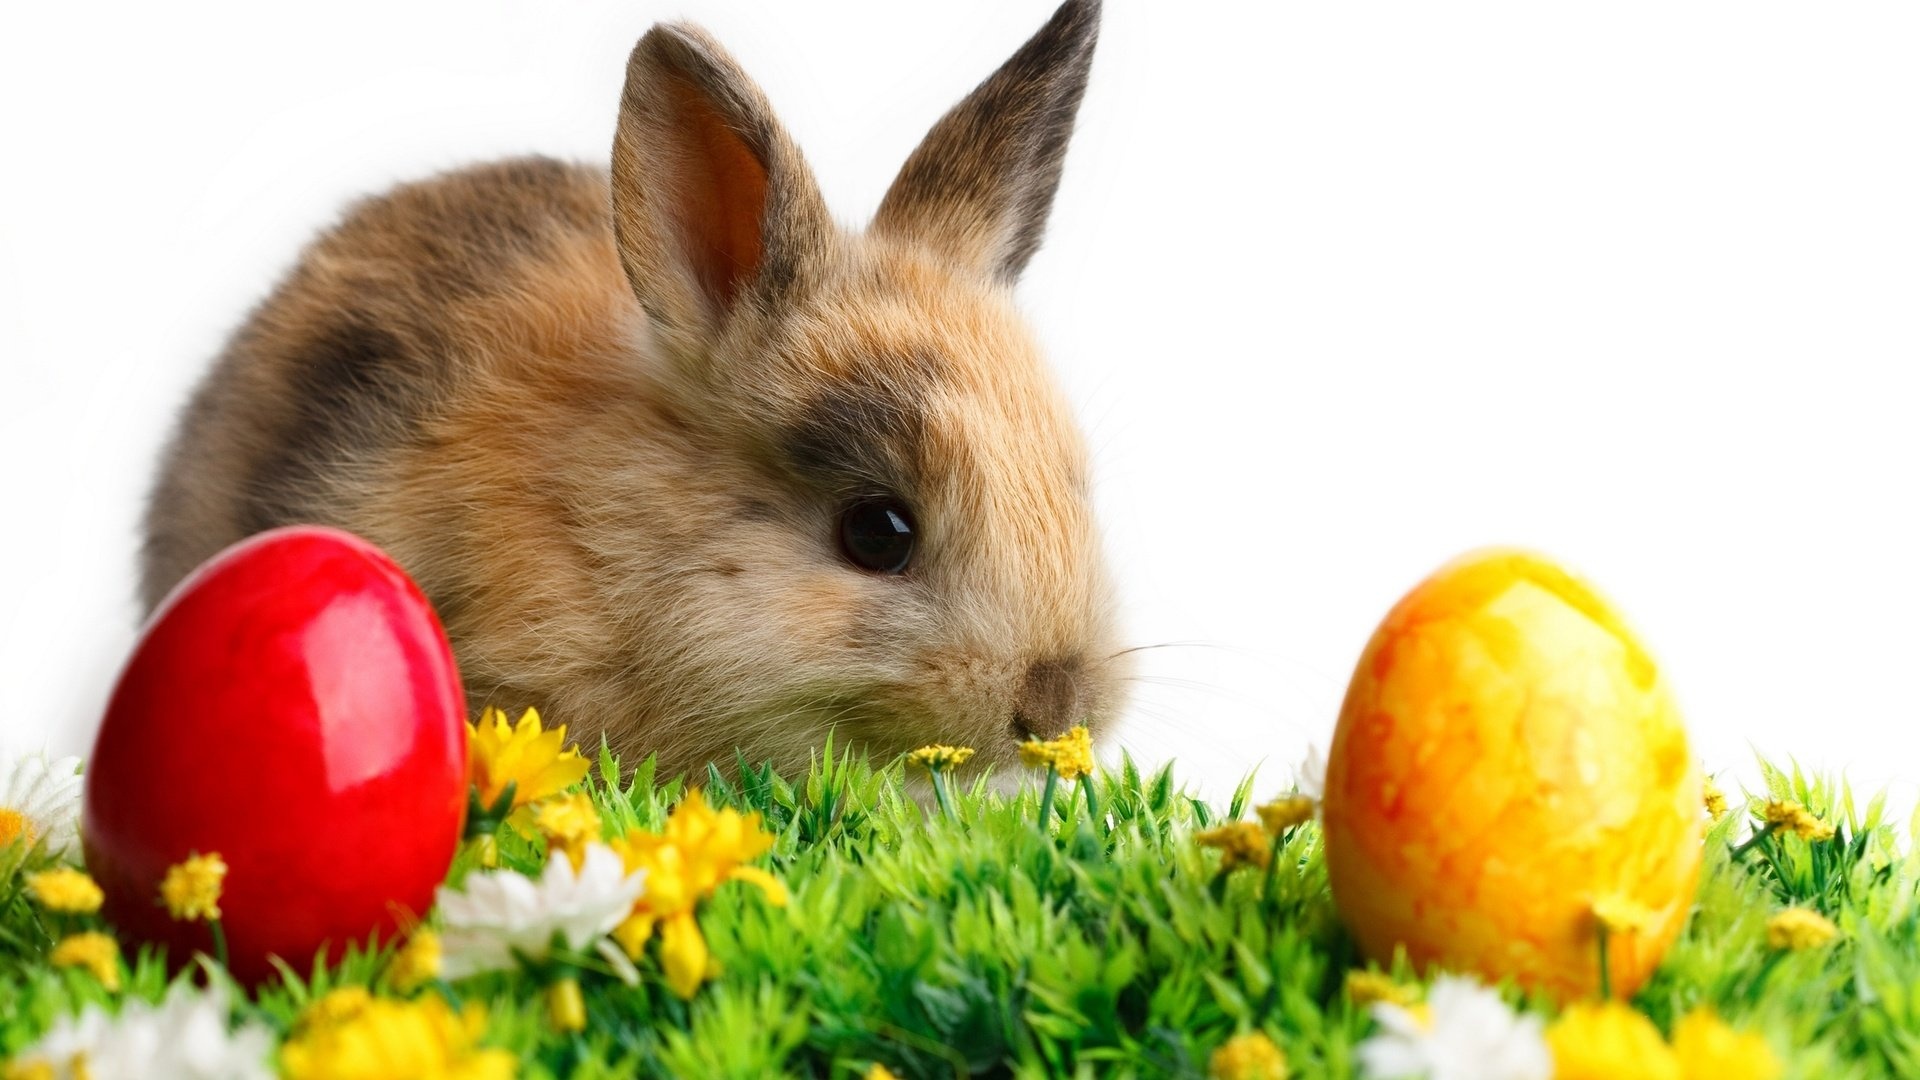 Bunny: The Easter rabbit, A folkloric figure and symbol of Easter. 1920x1080 Full HD Background.